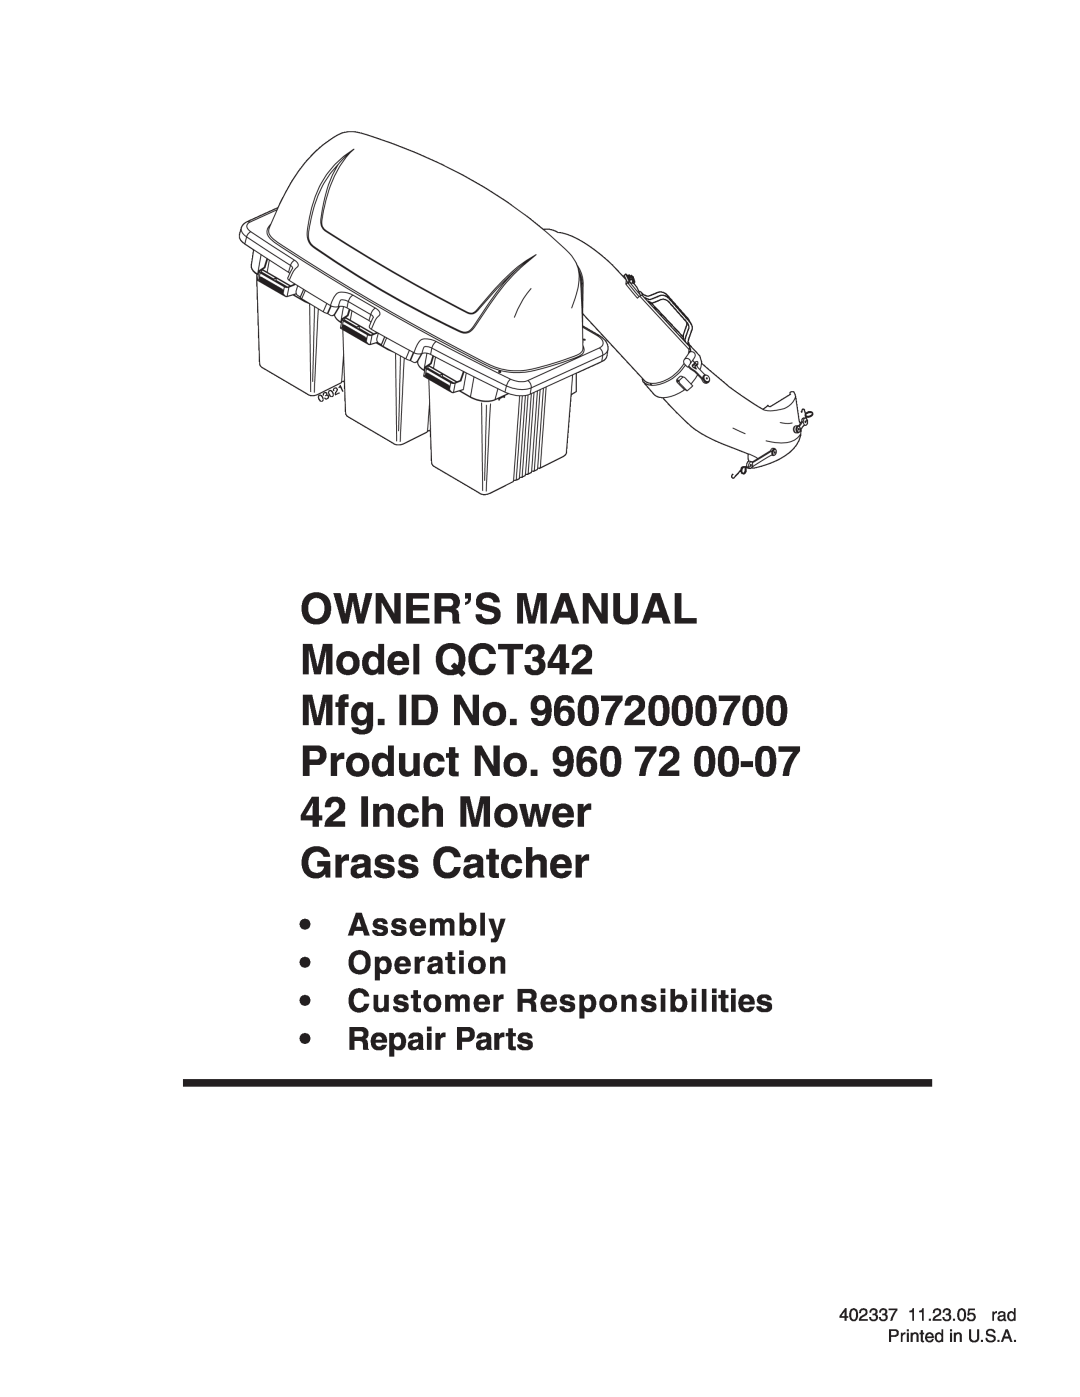 Poulan 960 72 00-07, QCT342, 402337 owner manual Product No. 960 72 42 Inch Mower Grass Catcher, Repair Parts 